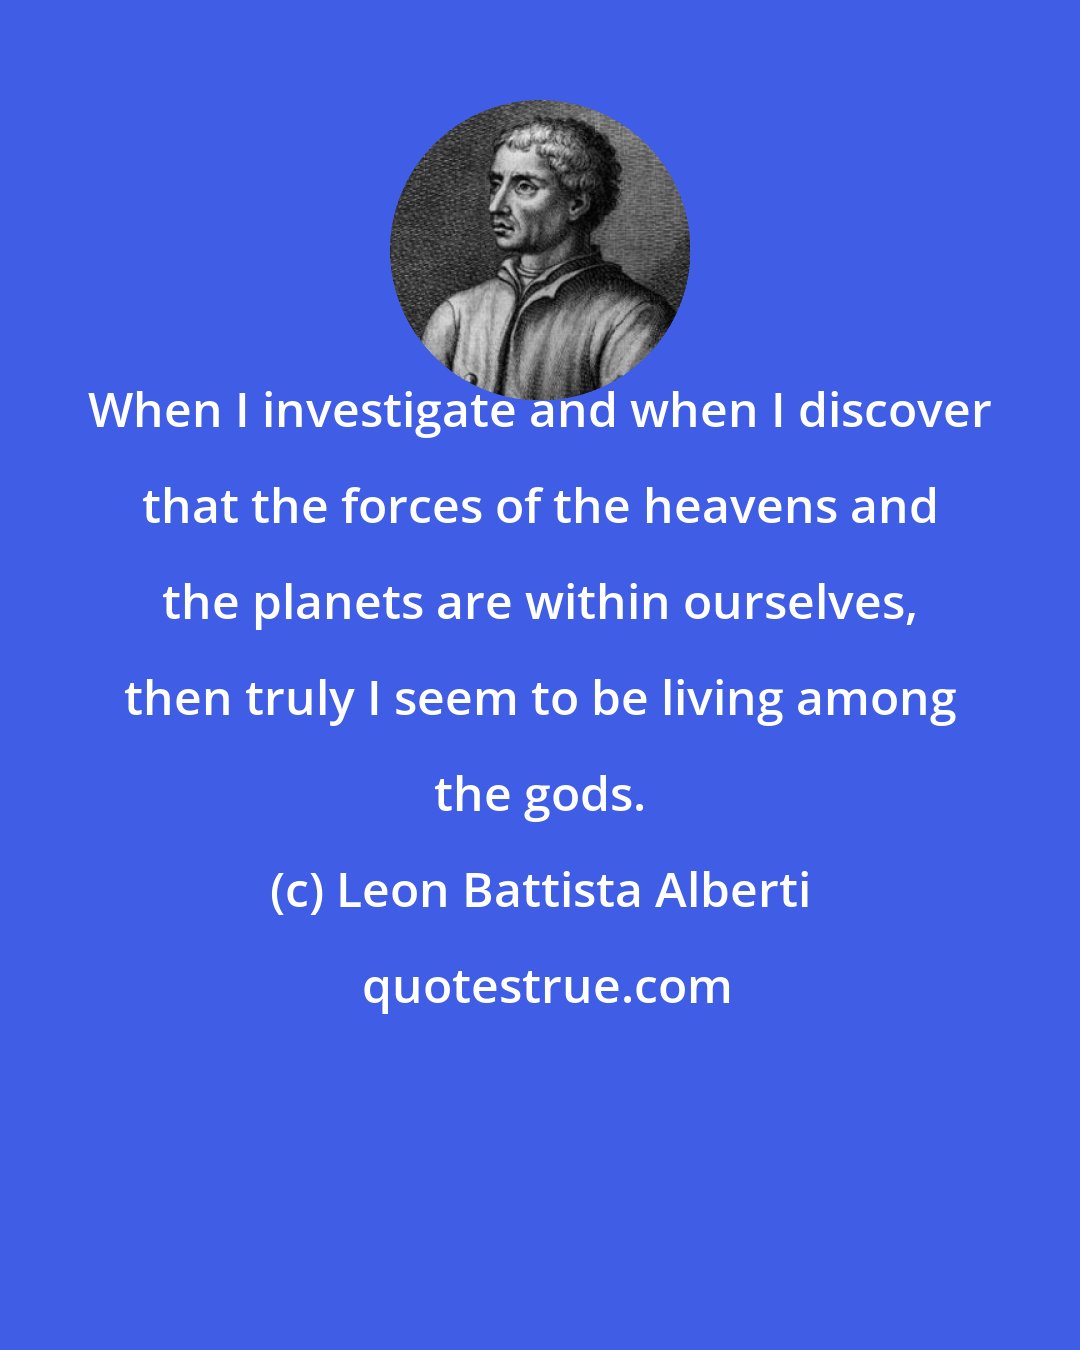 Leon Battista Alberti: When I investigate and when I discover that the forces of the heavens and the planets are within ourselves, then truly I seem to be living among the gods.